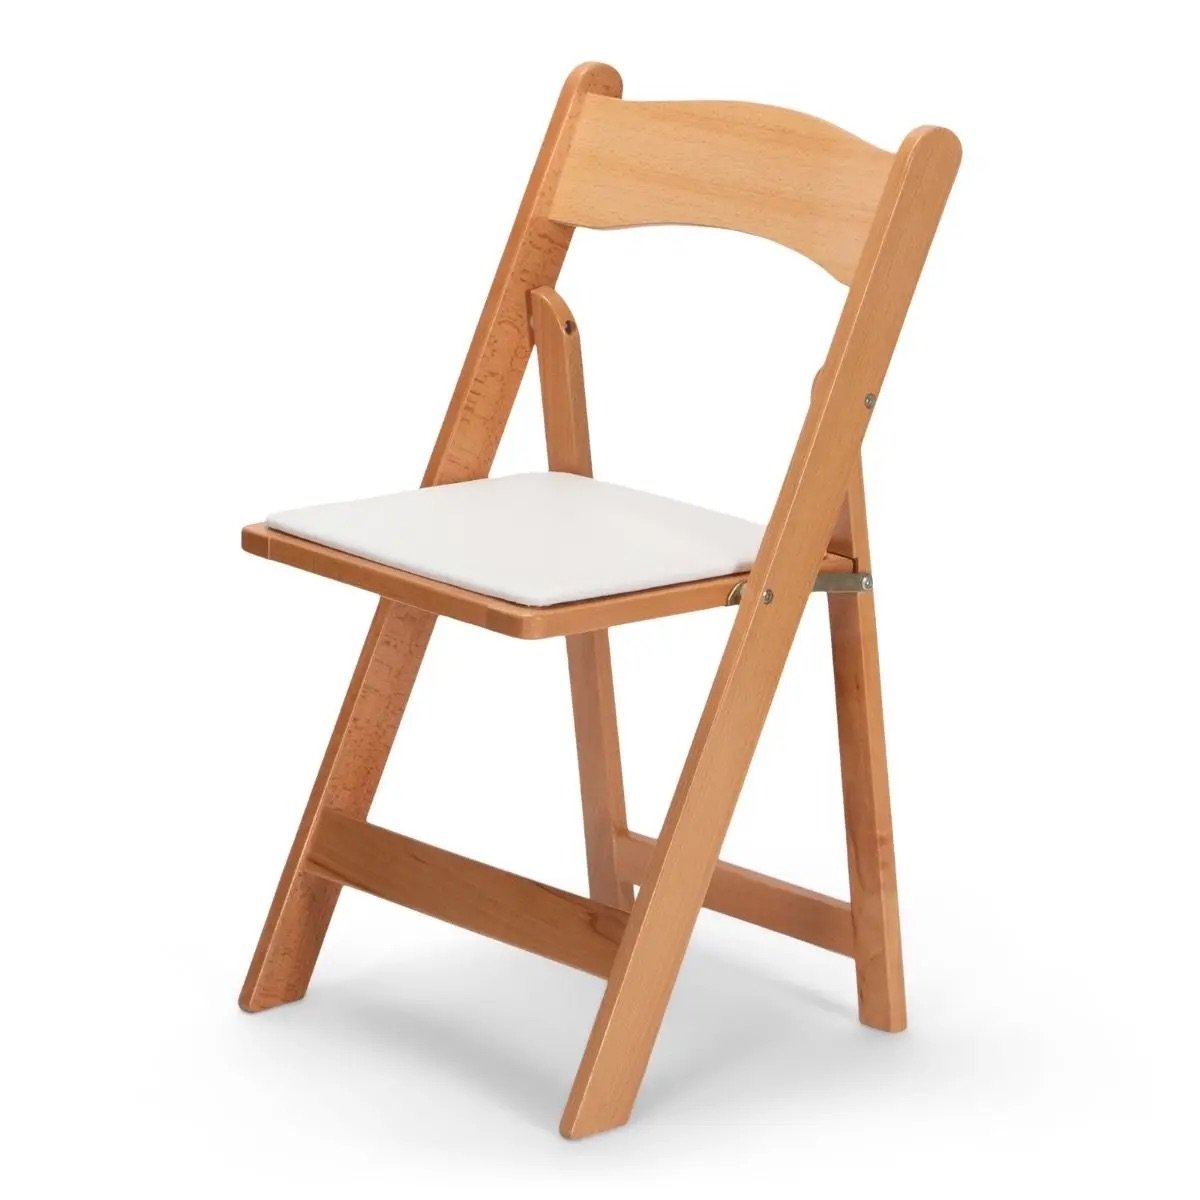 natural-wood-folding-chair-with-white-seat-hughes-event-rentals-charleston-sc2.jpeg